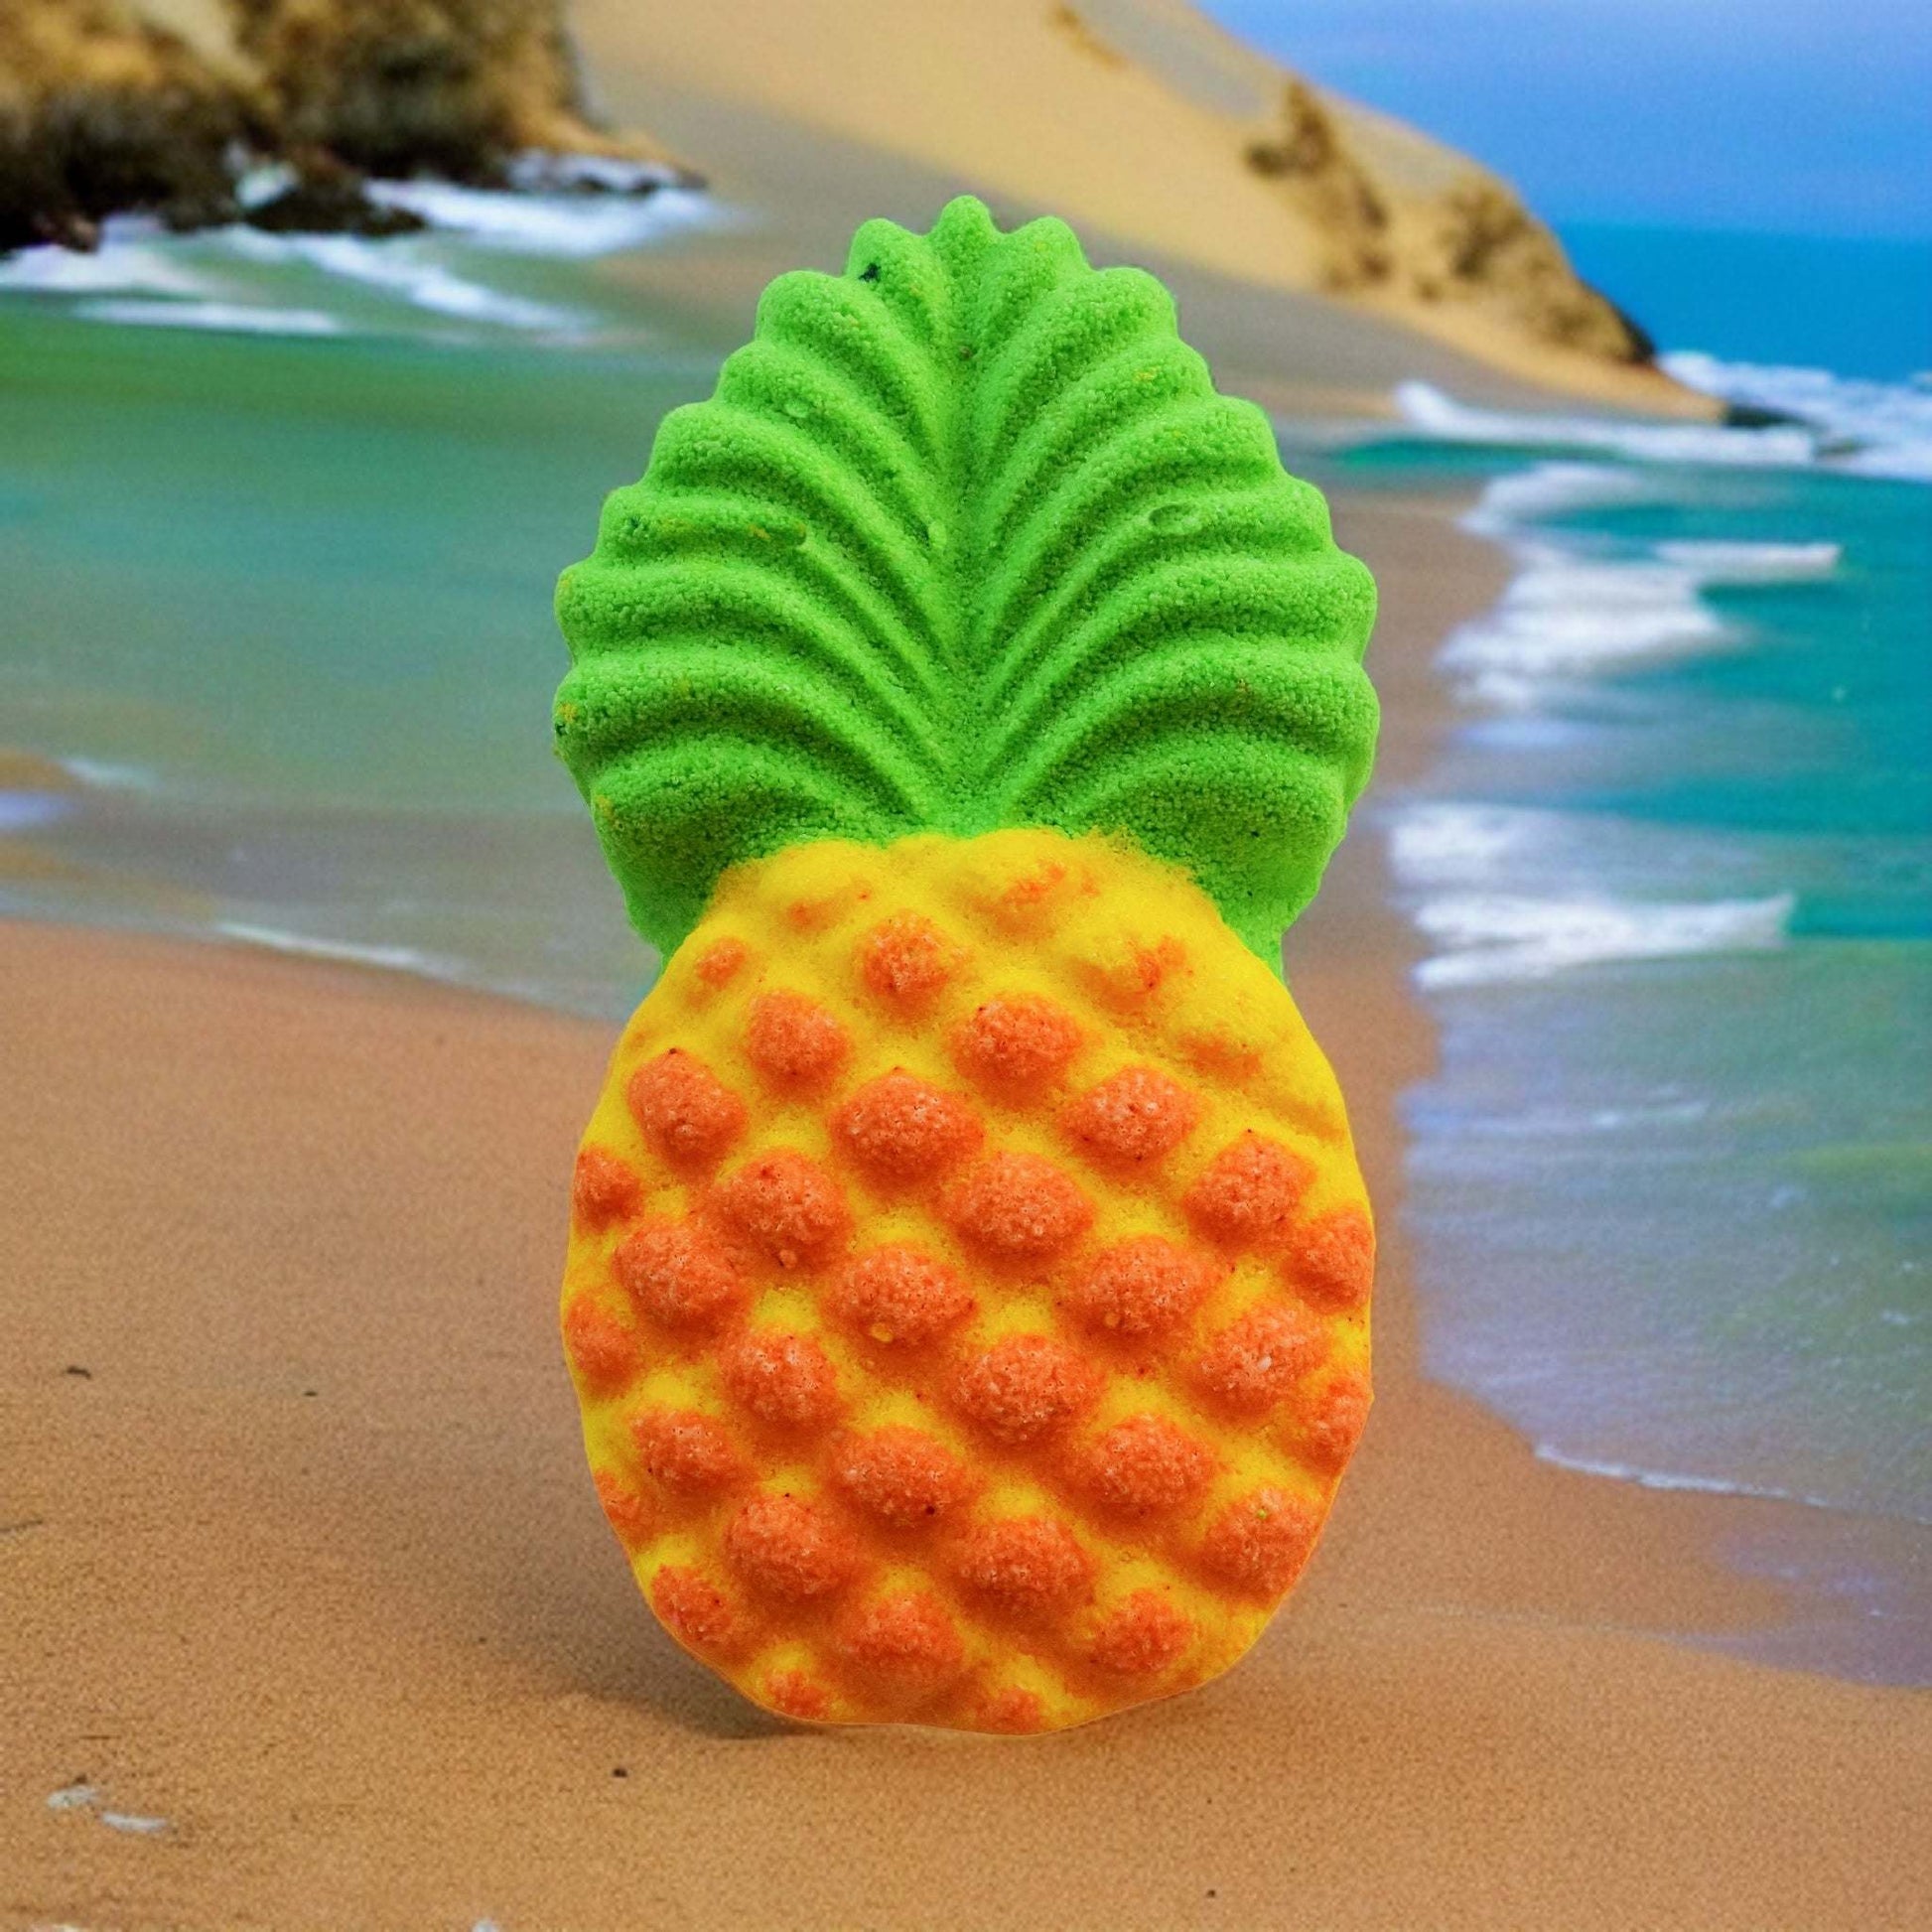 Experience the tropical scent of pineapple with our Pineapple Passion Bath Bomb. Relax and rejuvenate!